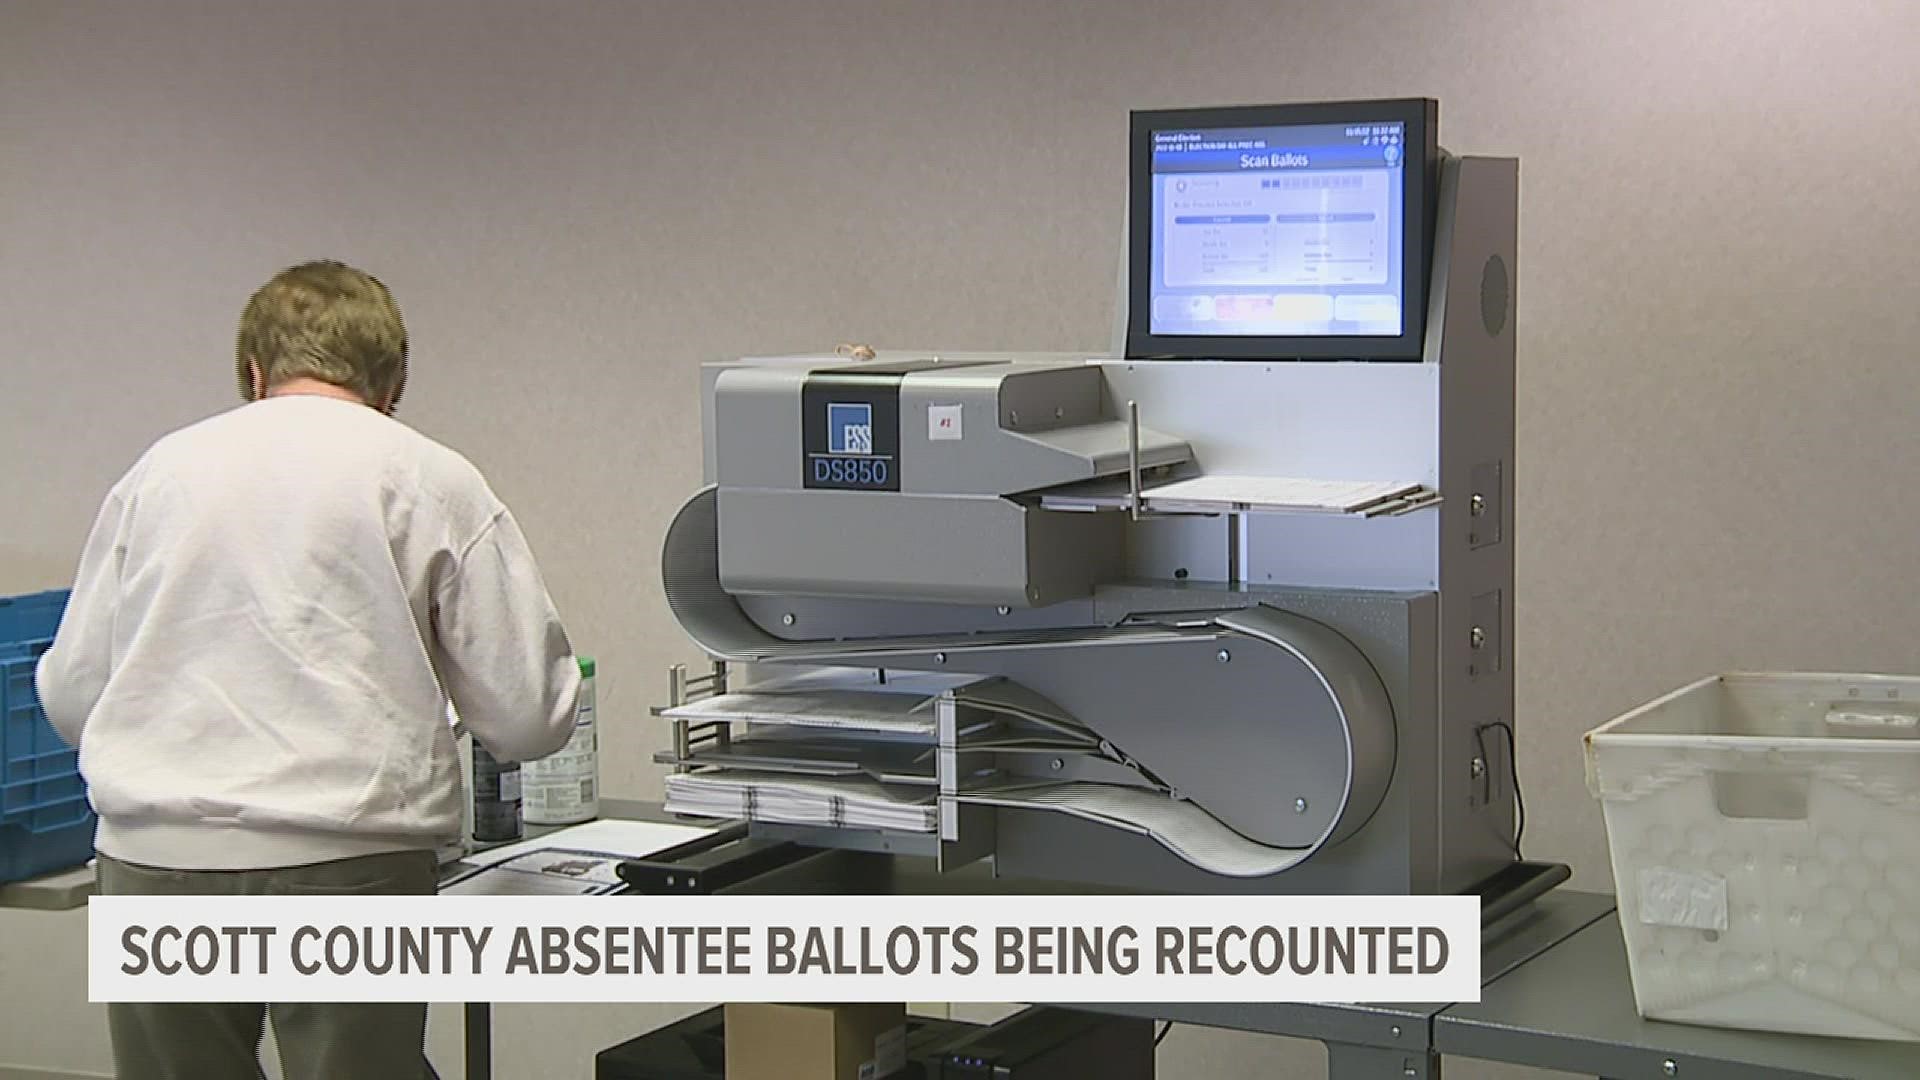 Election officials will re-canvass Wednesday morning to confirm the results.